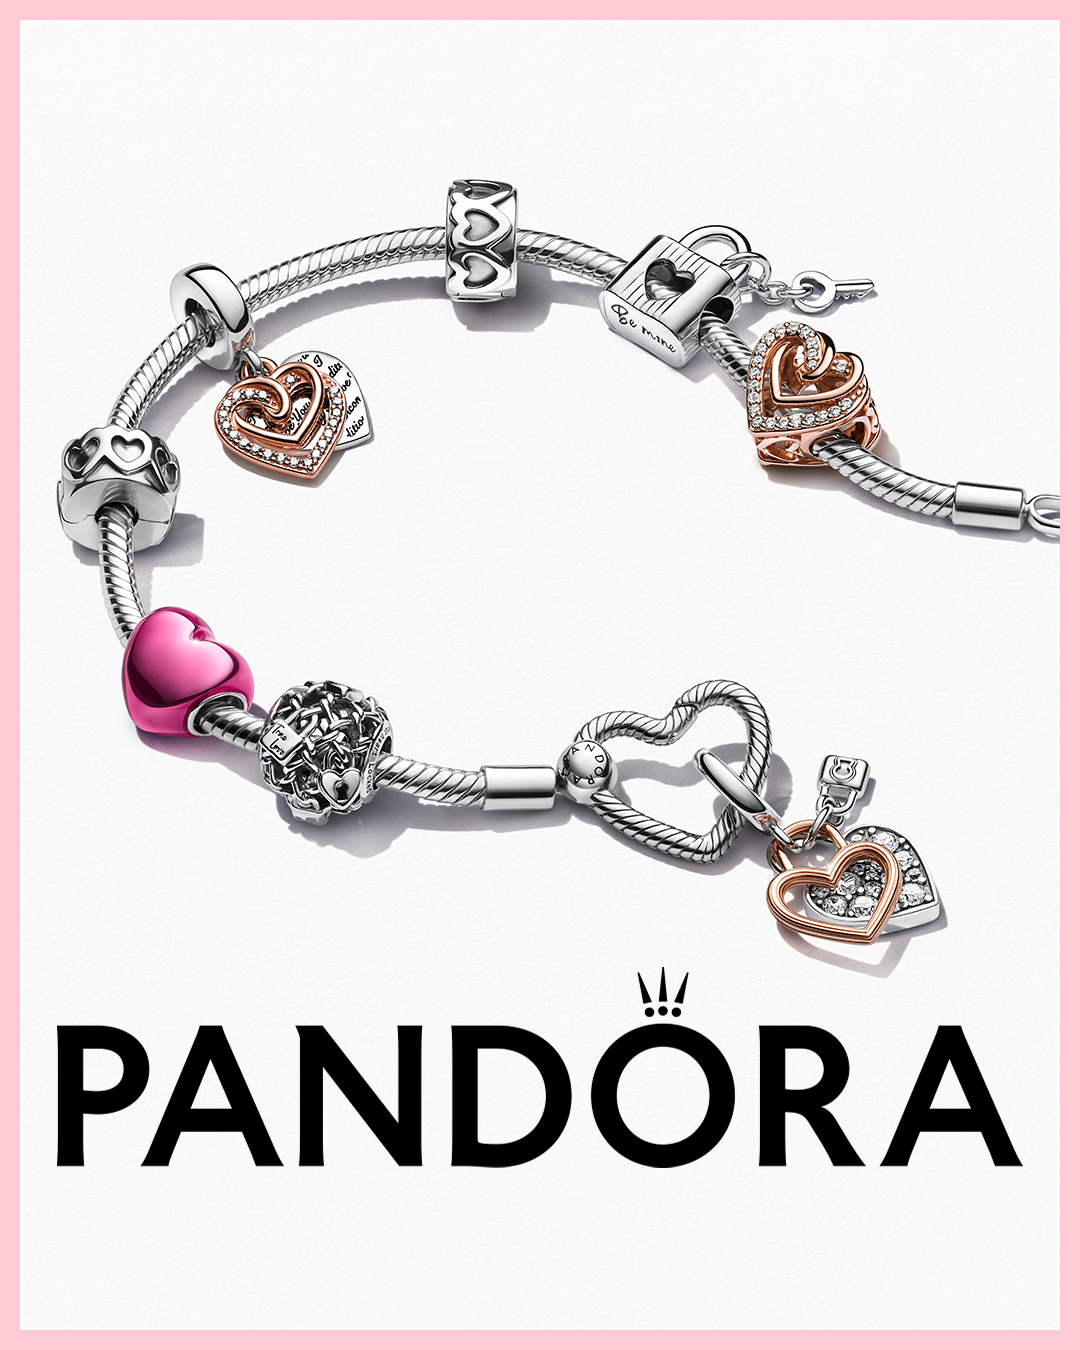 Just in time for Valentine's Day from PANDORA